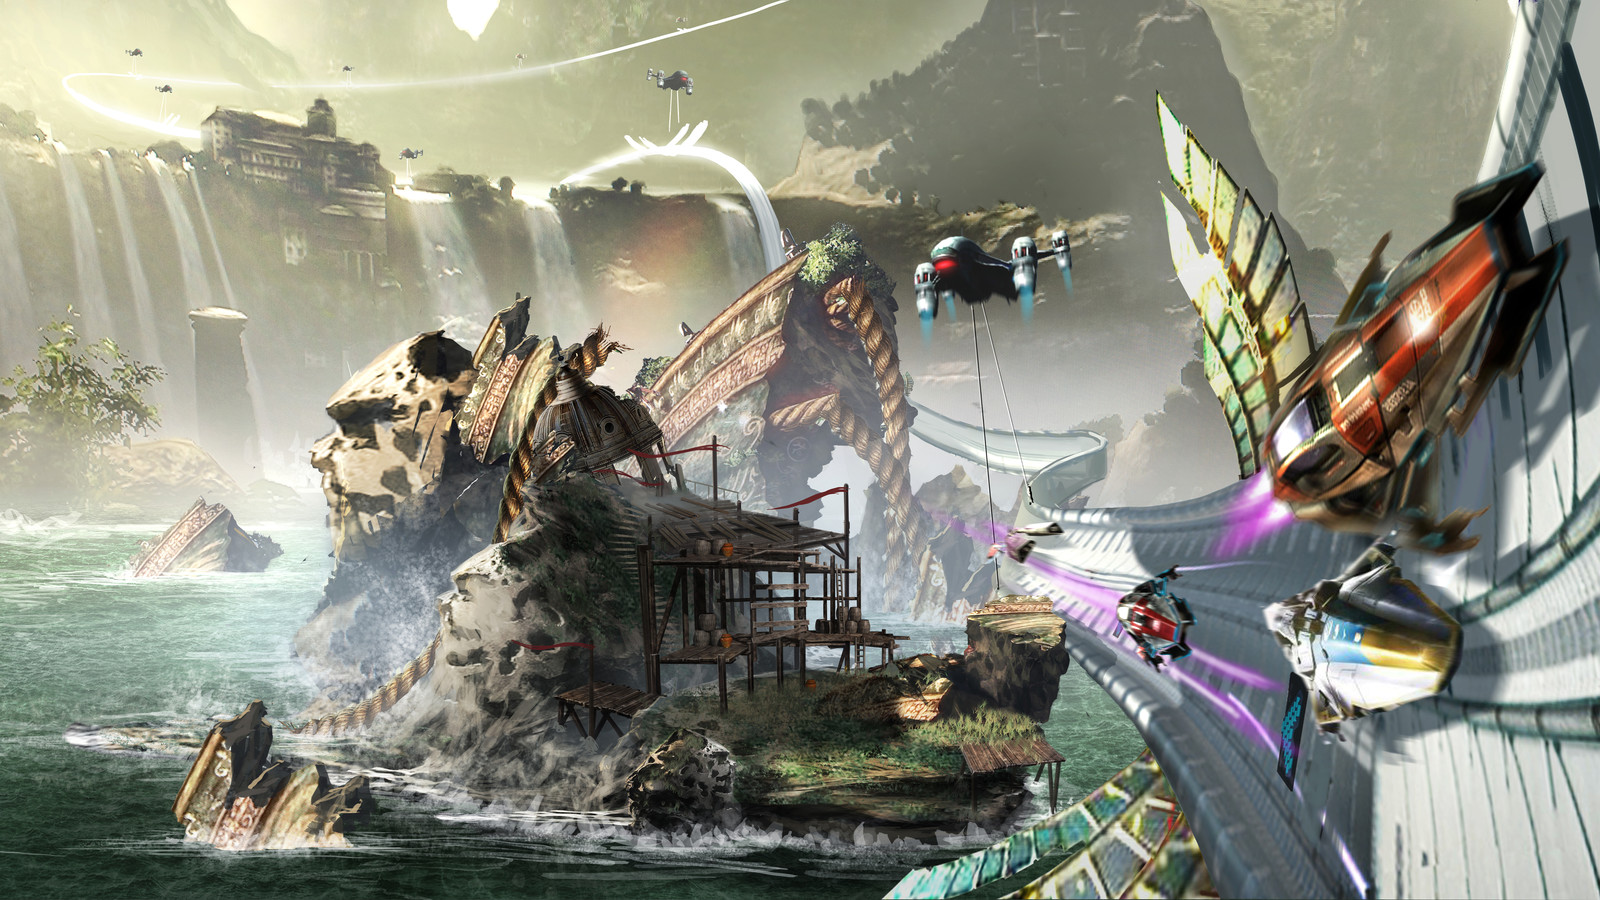 Heavenly Sword + Wipeout DLC level